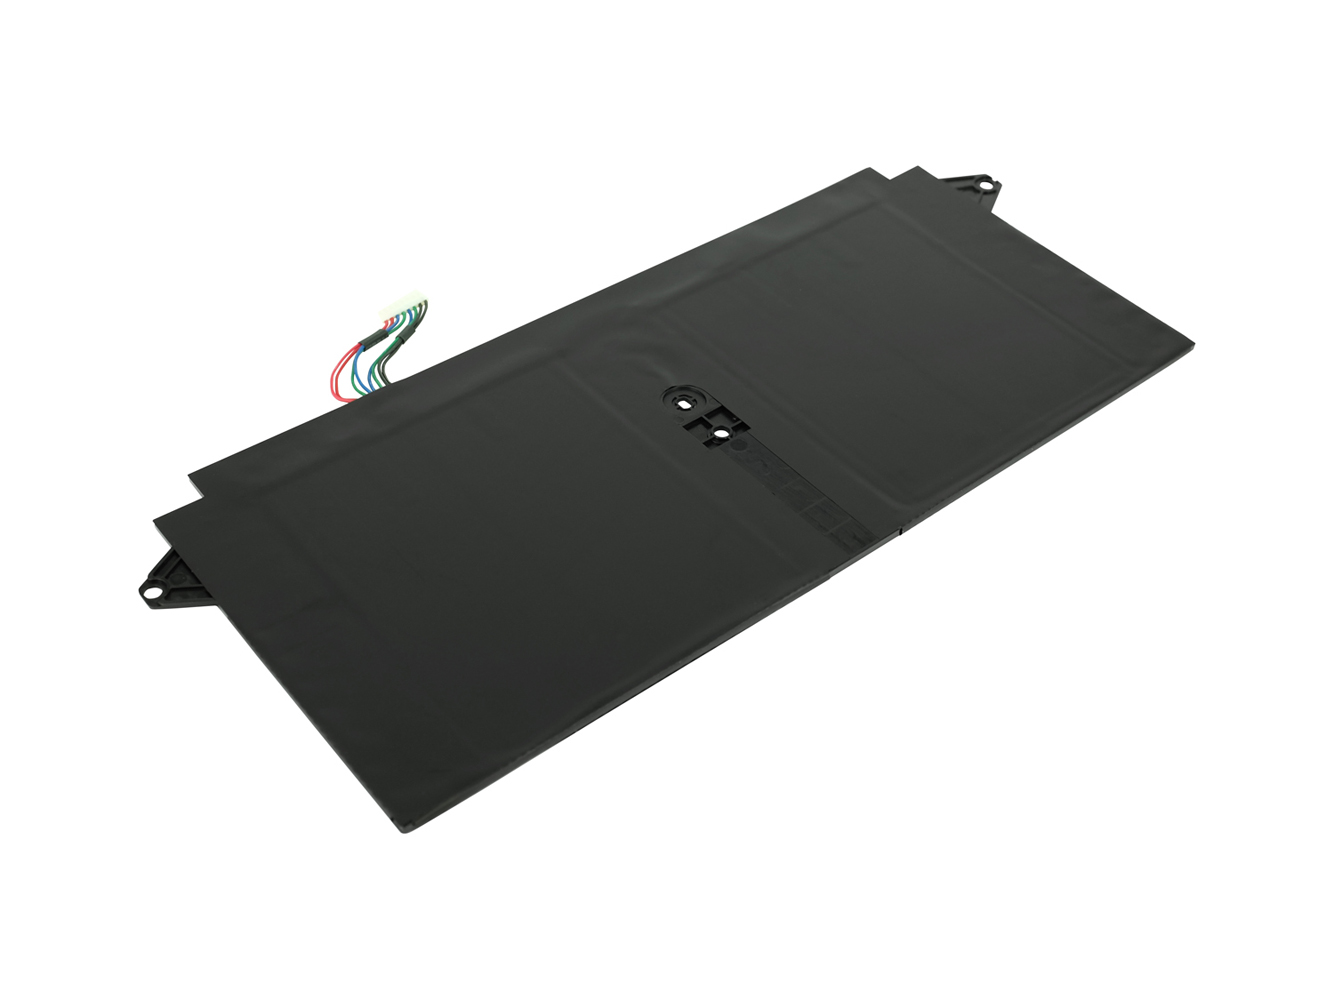 2ICP3/65/114-2, AP12F3J replacement Laptop Battery for Acer Aspire S7-391 KT.00403.009, Aspire S7-391 Ultrabook Series, 4680mAh, 7.40V